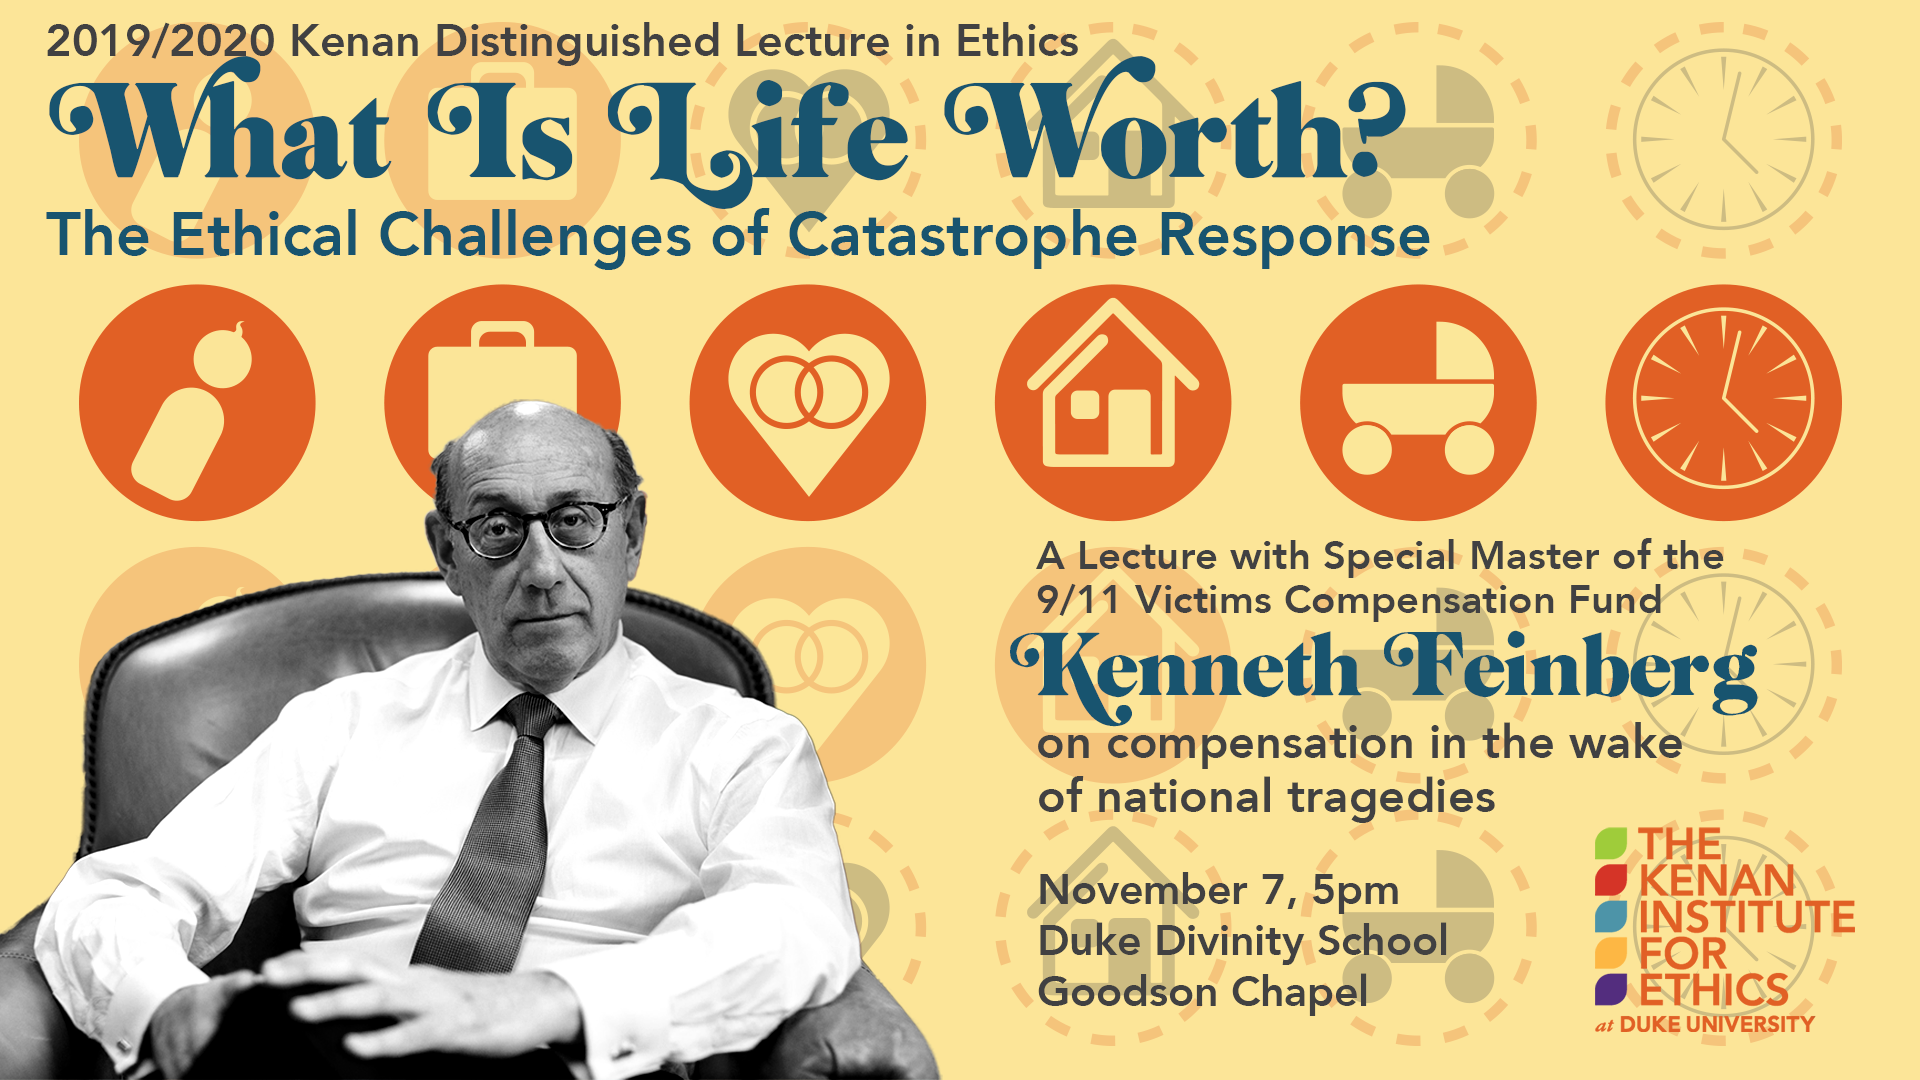 Kenan Distinguished Lecture in Ethics: What is Life Worth, The Ethical Challenges of Catastrophe Response